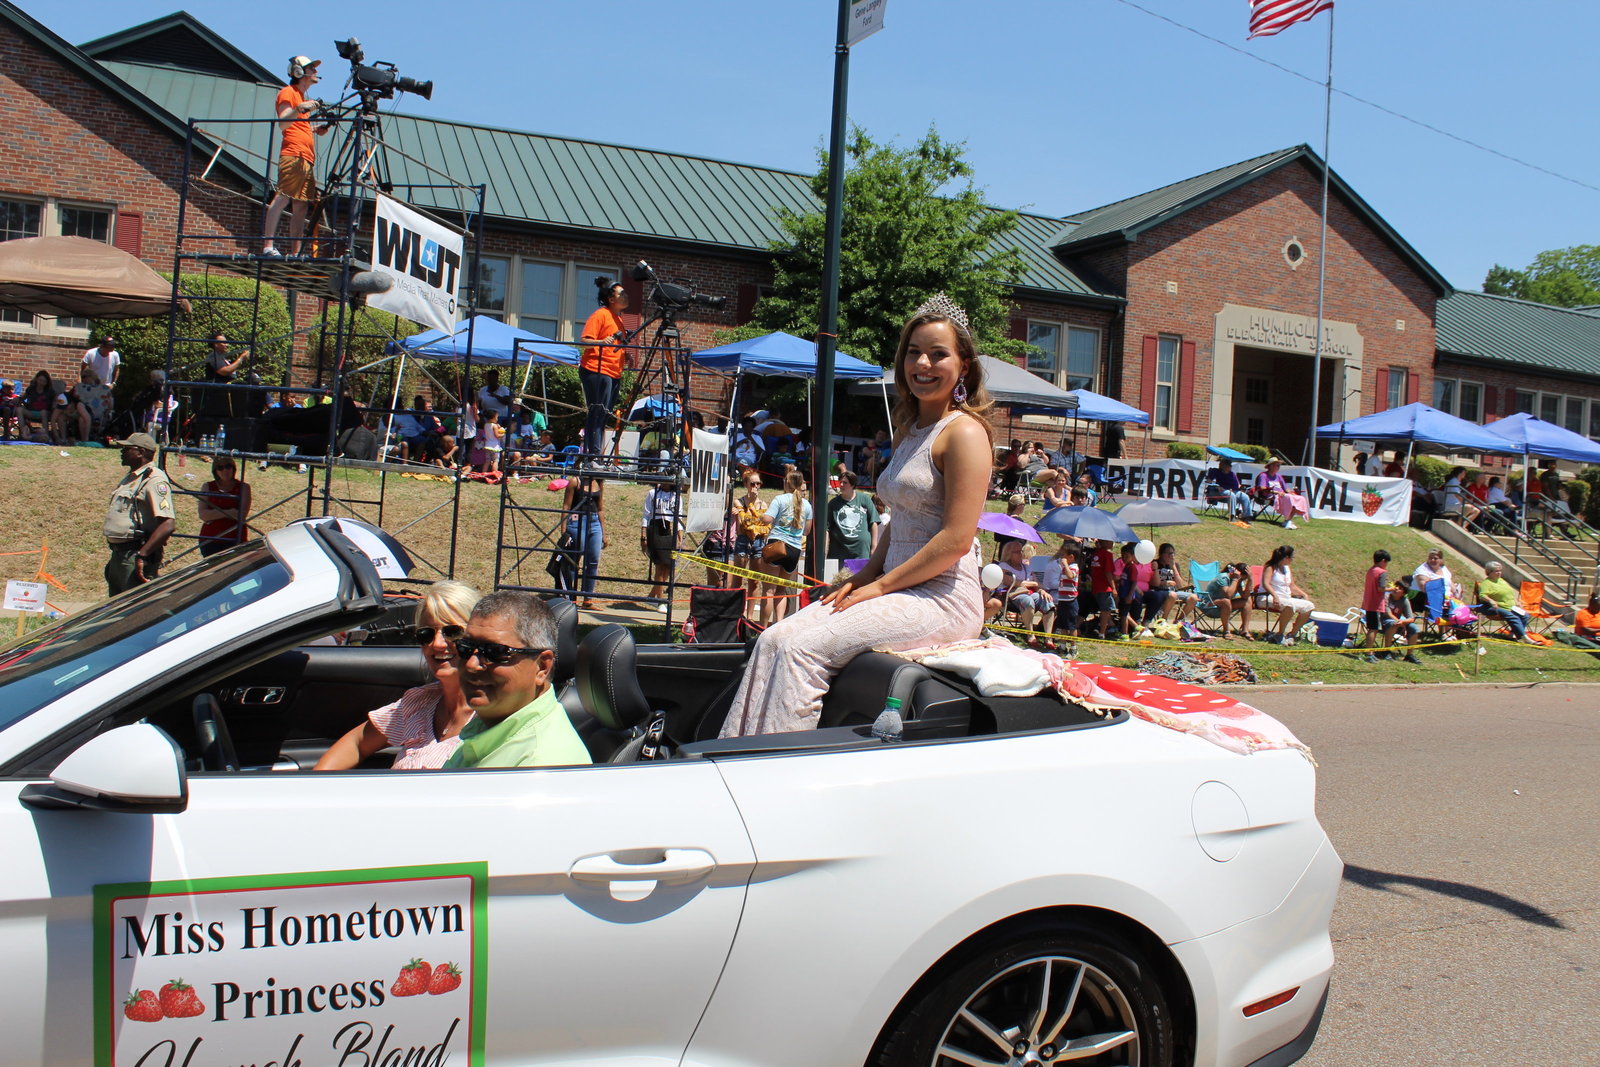 West Tennessee Strawberry Festival - Humboldt TN - Girls Parade15